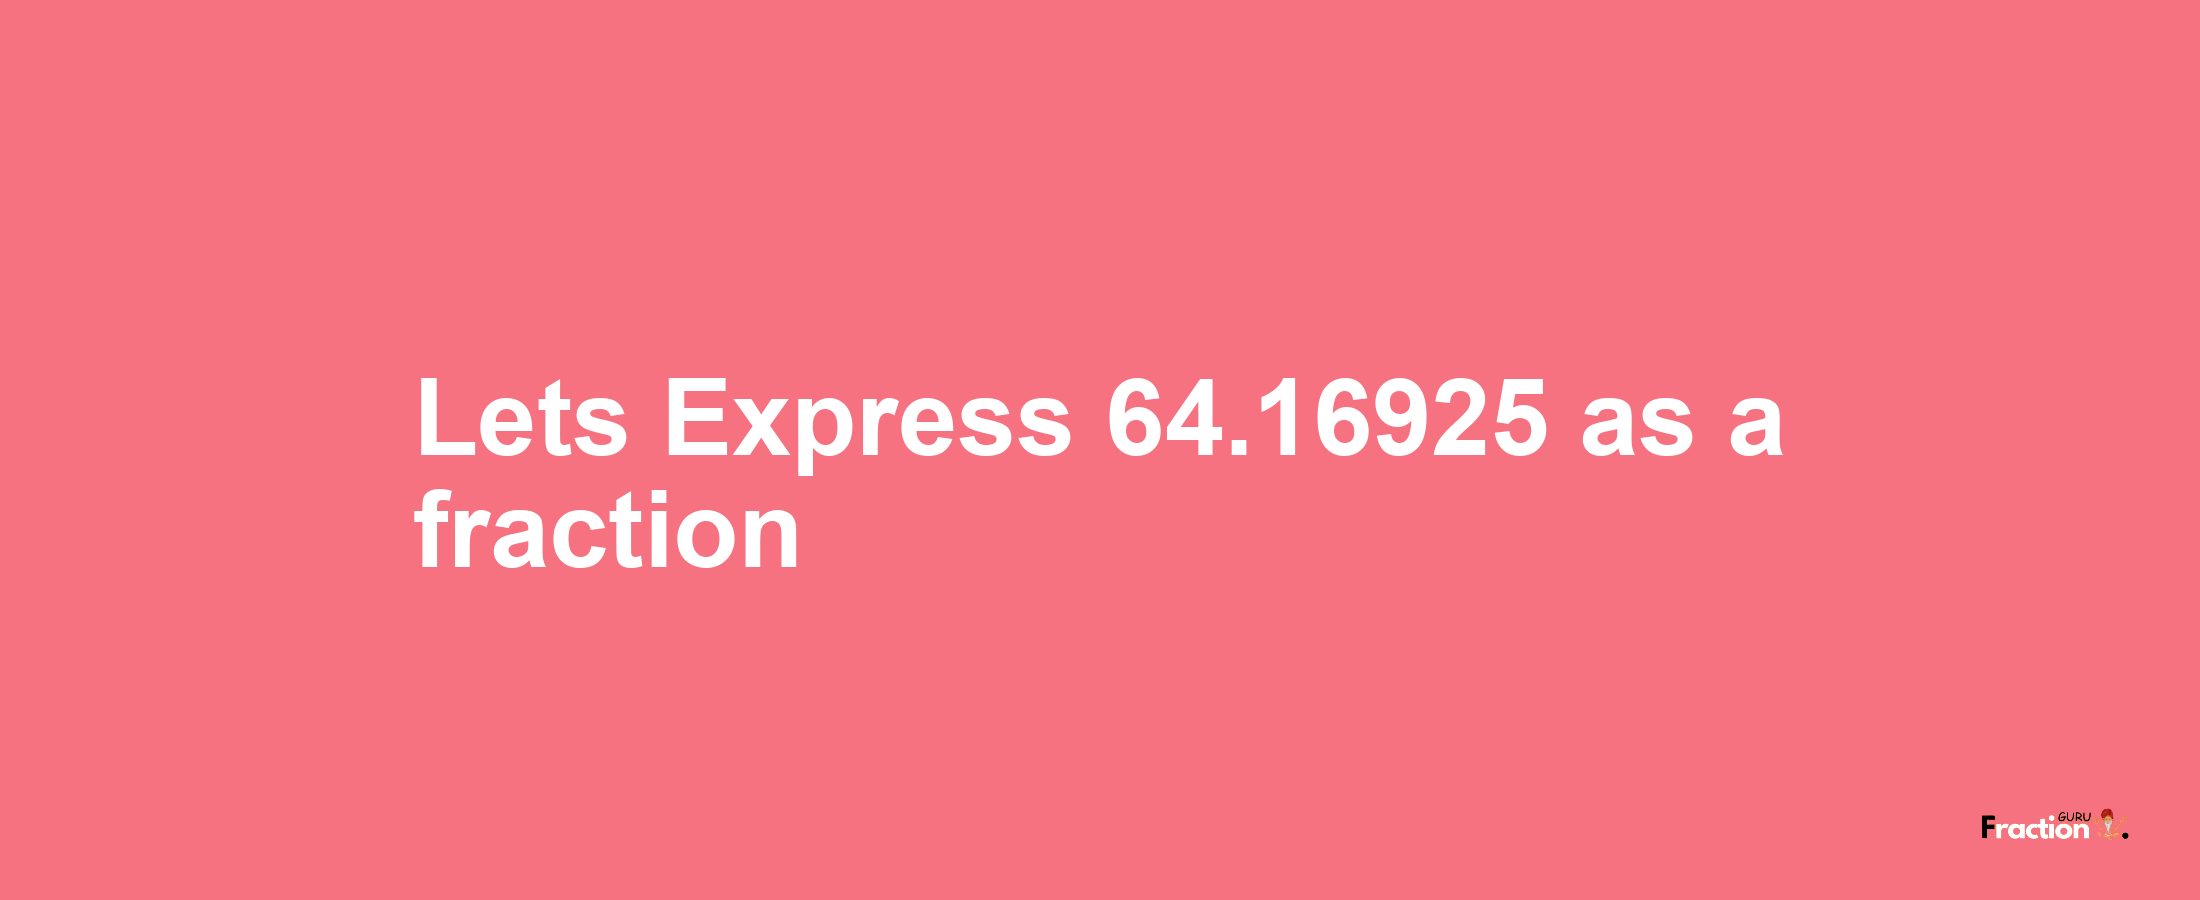 Lets Express 64.16925 as afraction